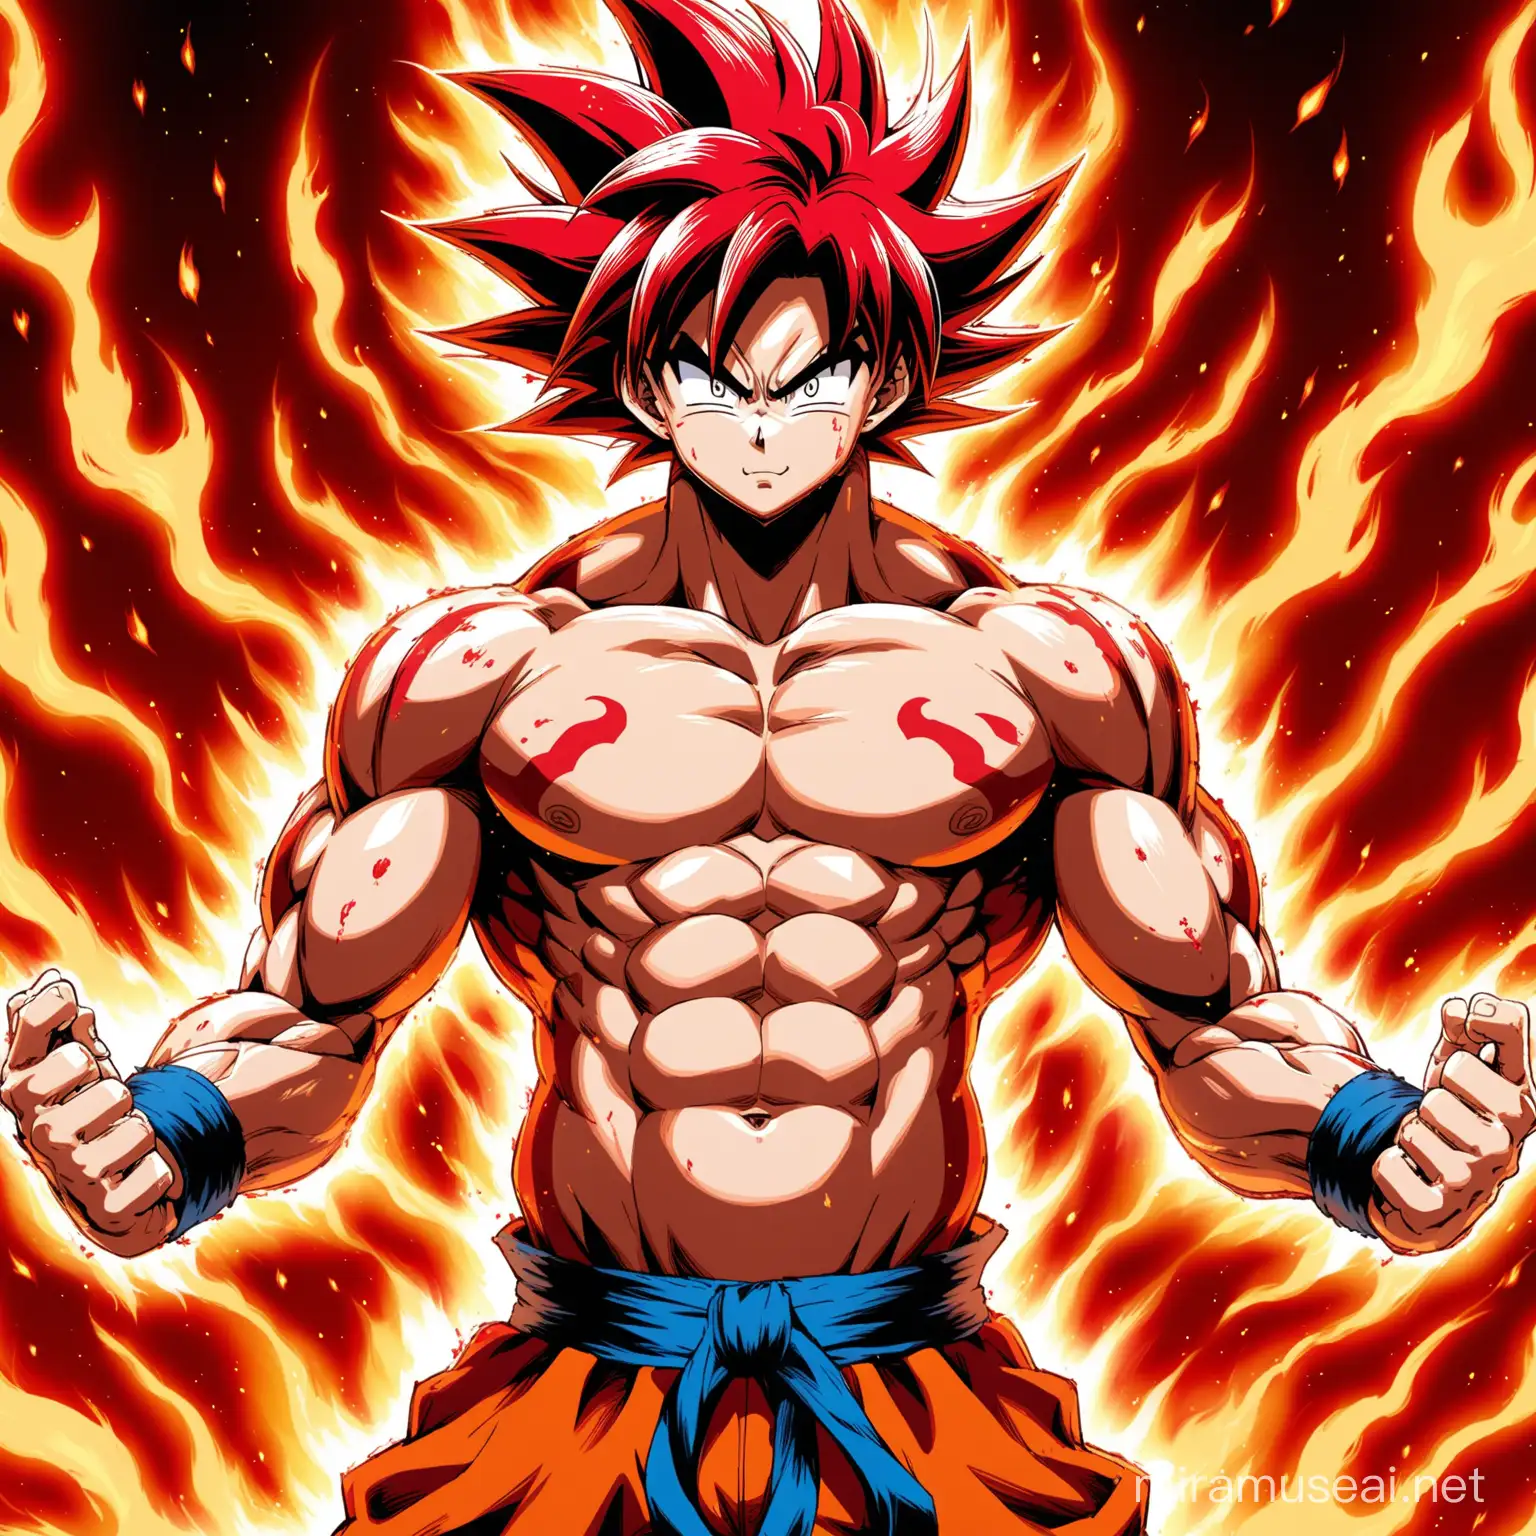 SHIRTLESS JACKED GOKU WITH NEW RED-WHITE COLOR TRANSFORMATION IN A RED FIRE, CROSS IN THE BACKGROUND